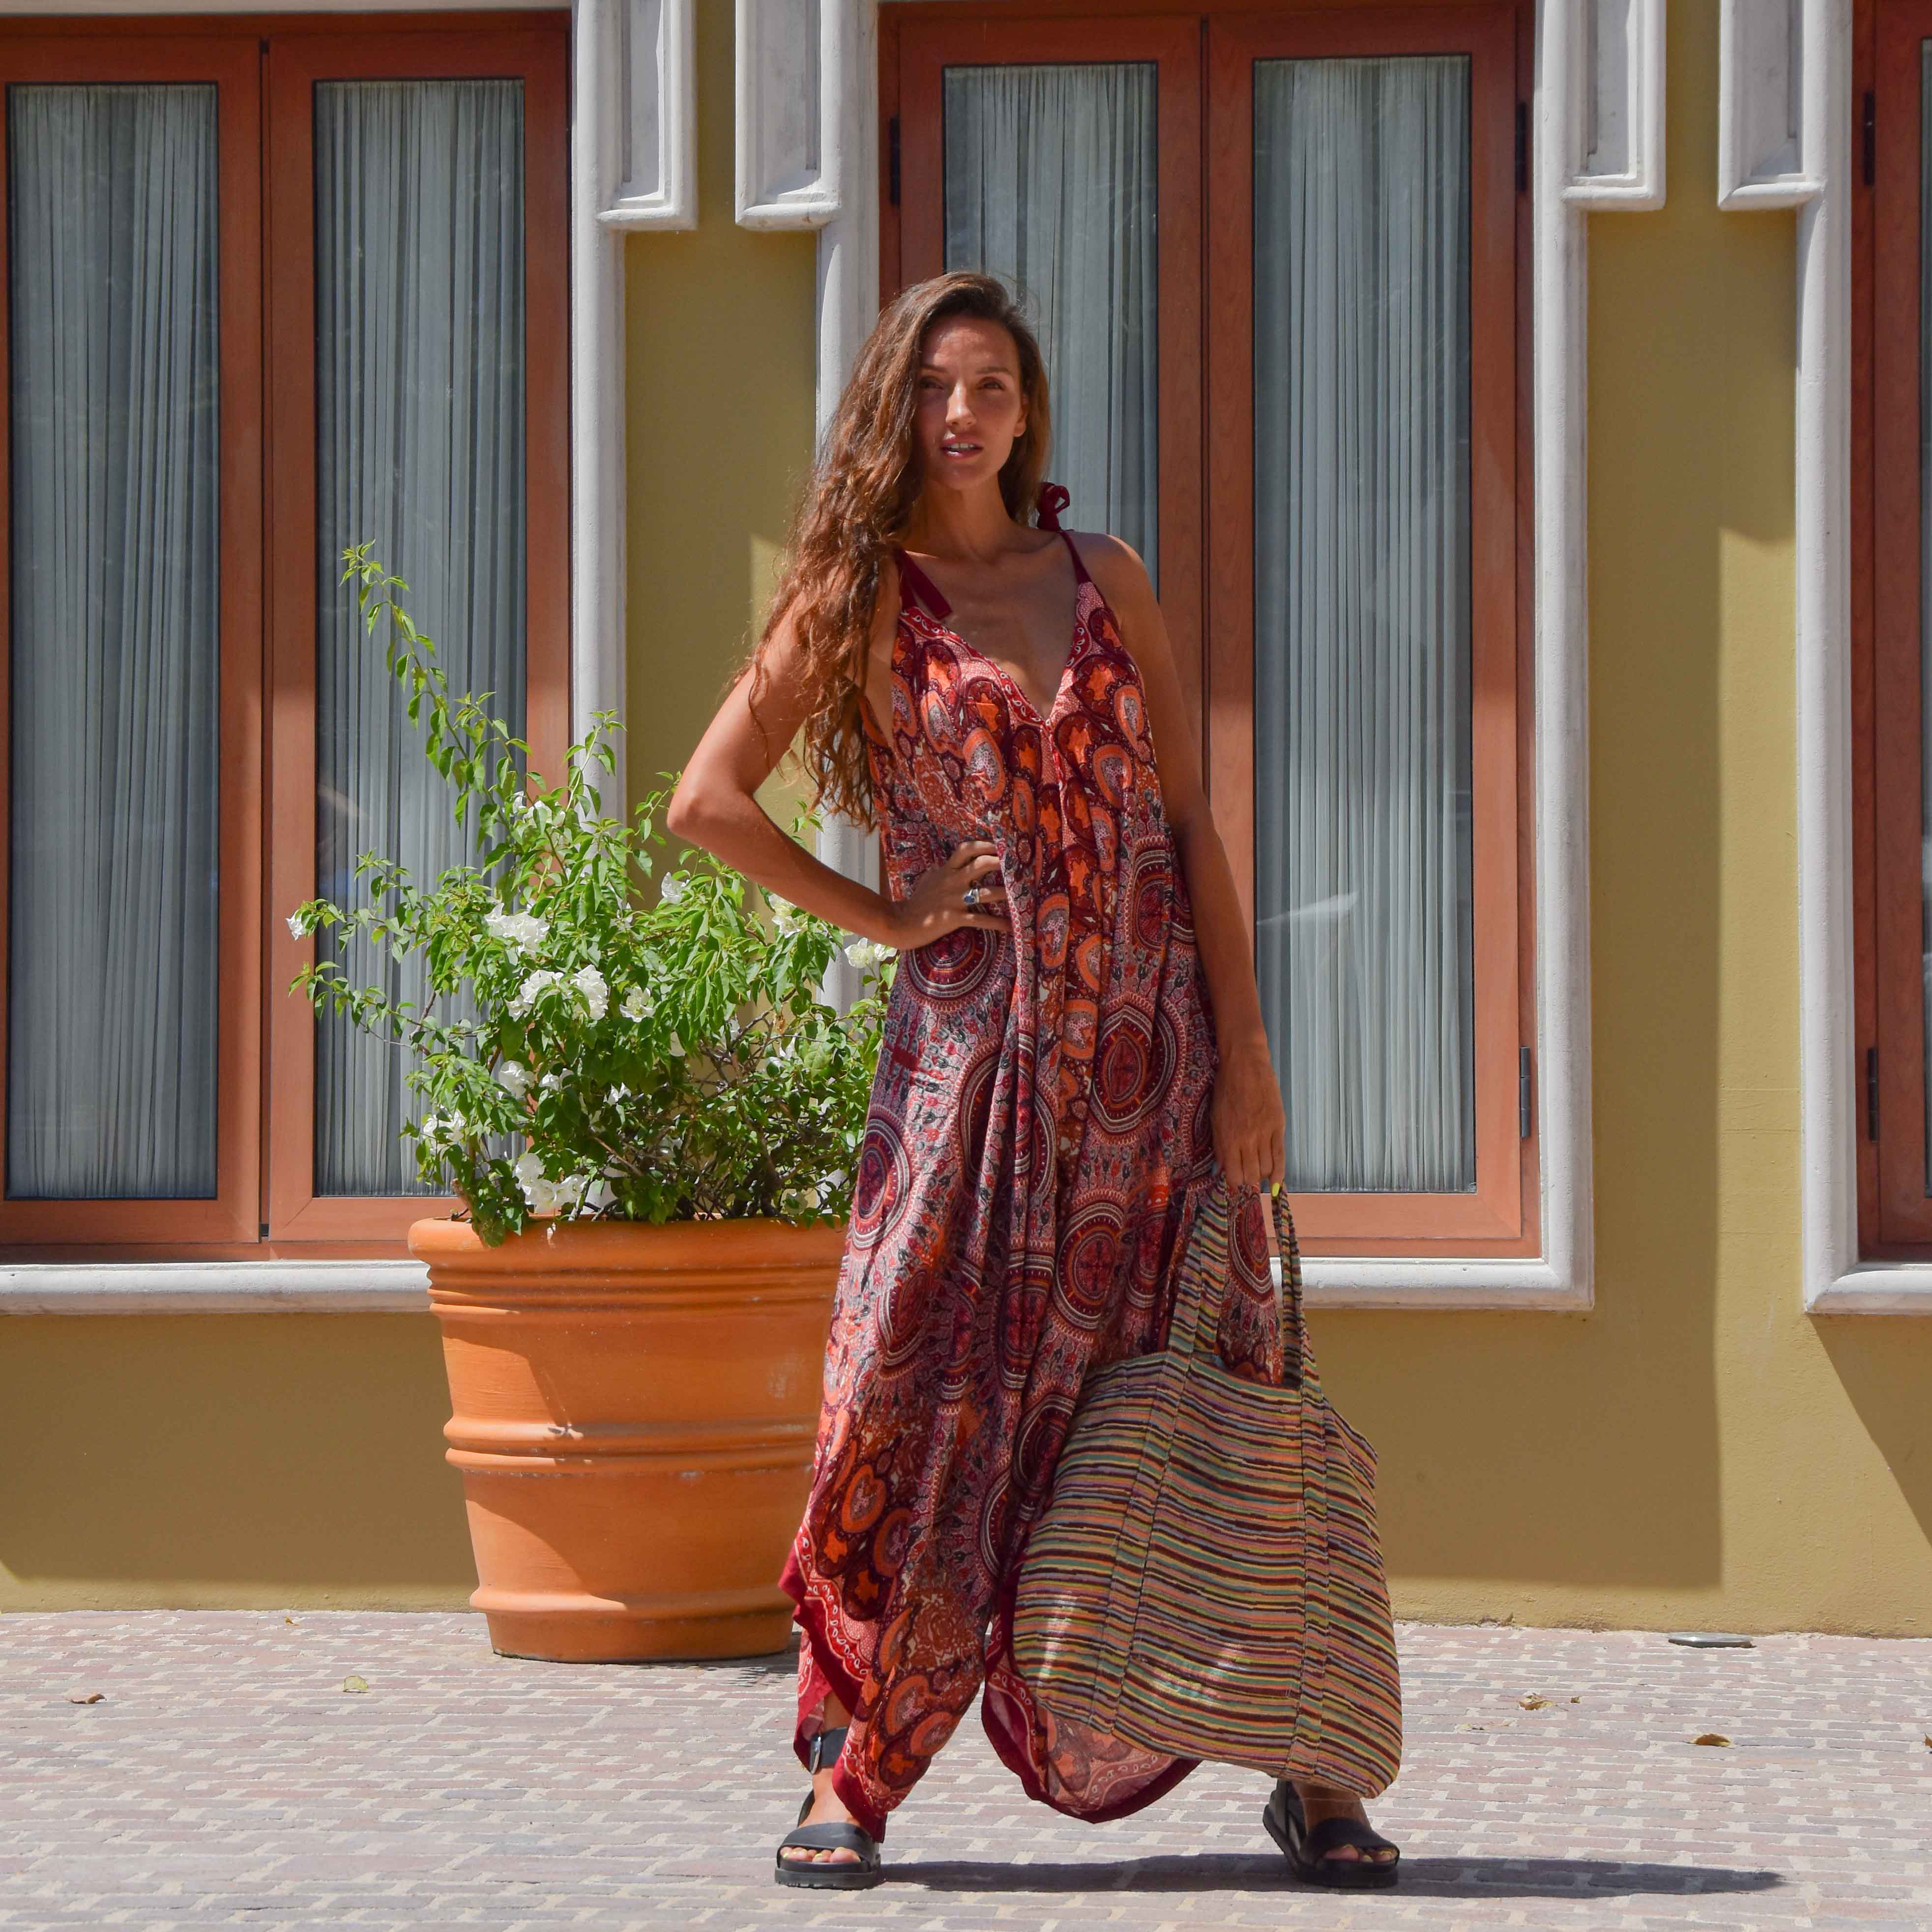 AKUBALI JUMPSUIT DRESS Elepanta Jumpsuits - Buy Today Elephant Pants Jewelry And Bohemian Clothes Handmade In Thailand Help To Save The Elephants FairTrade And Vegan